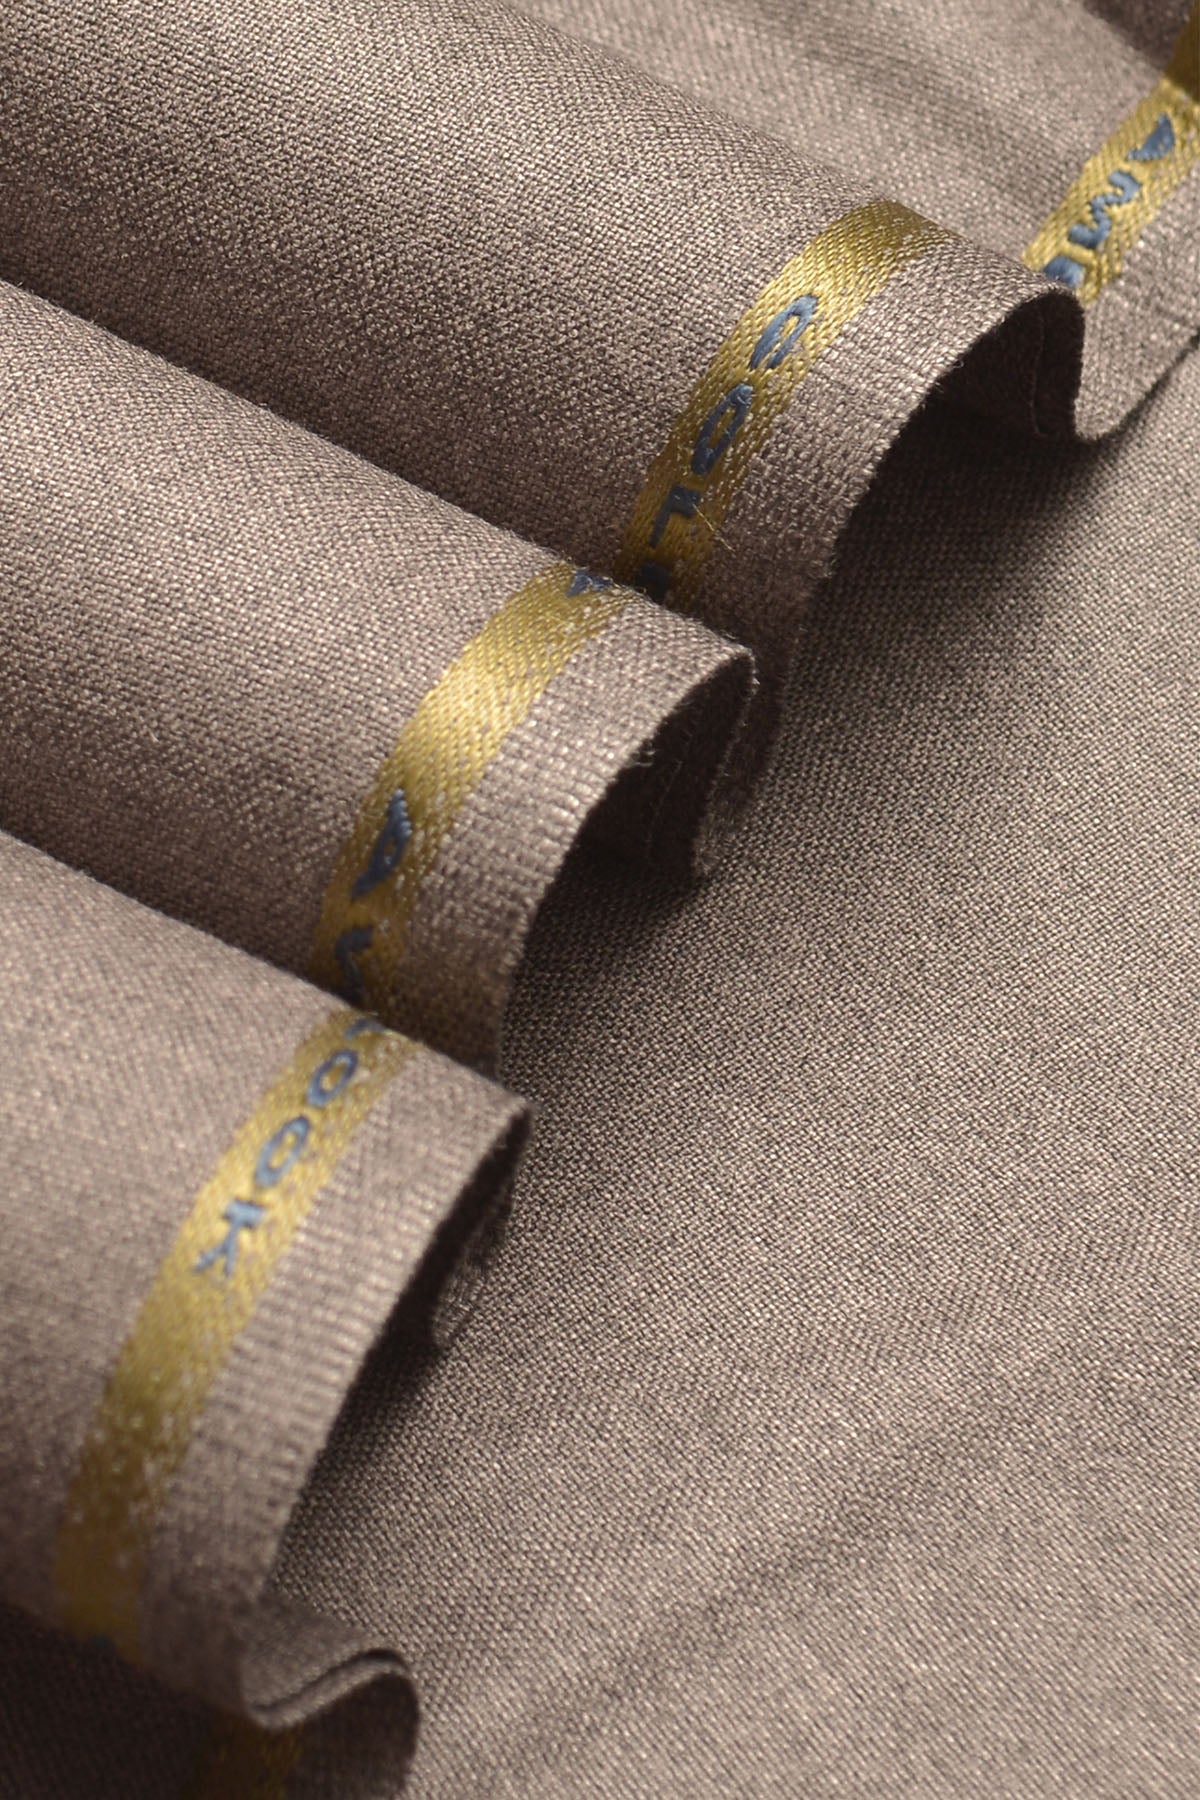 FINE WOOL Suiting